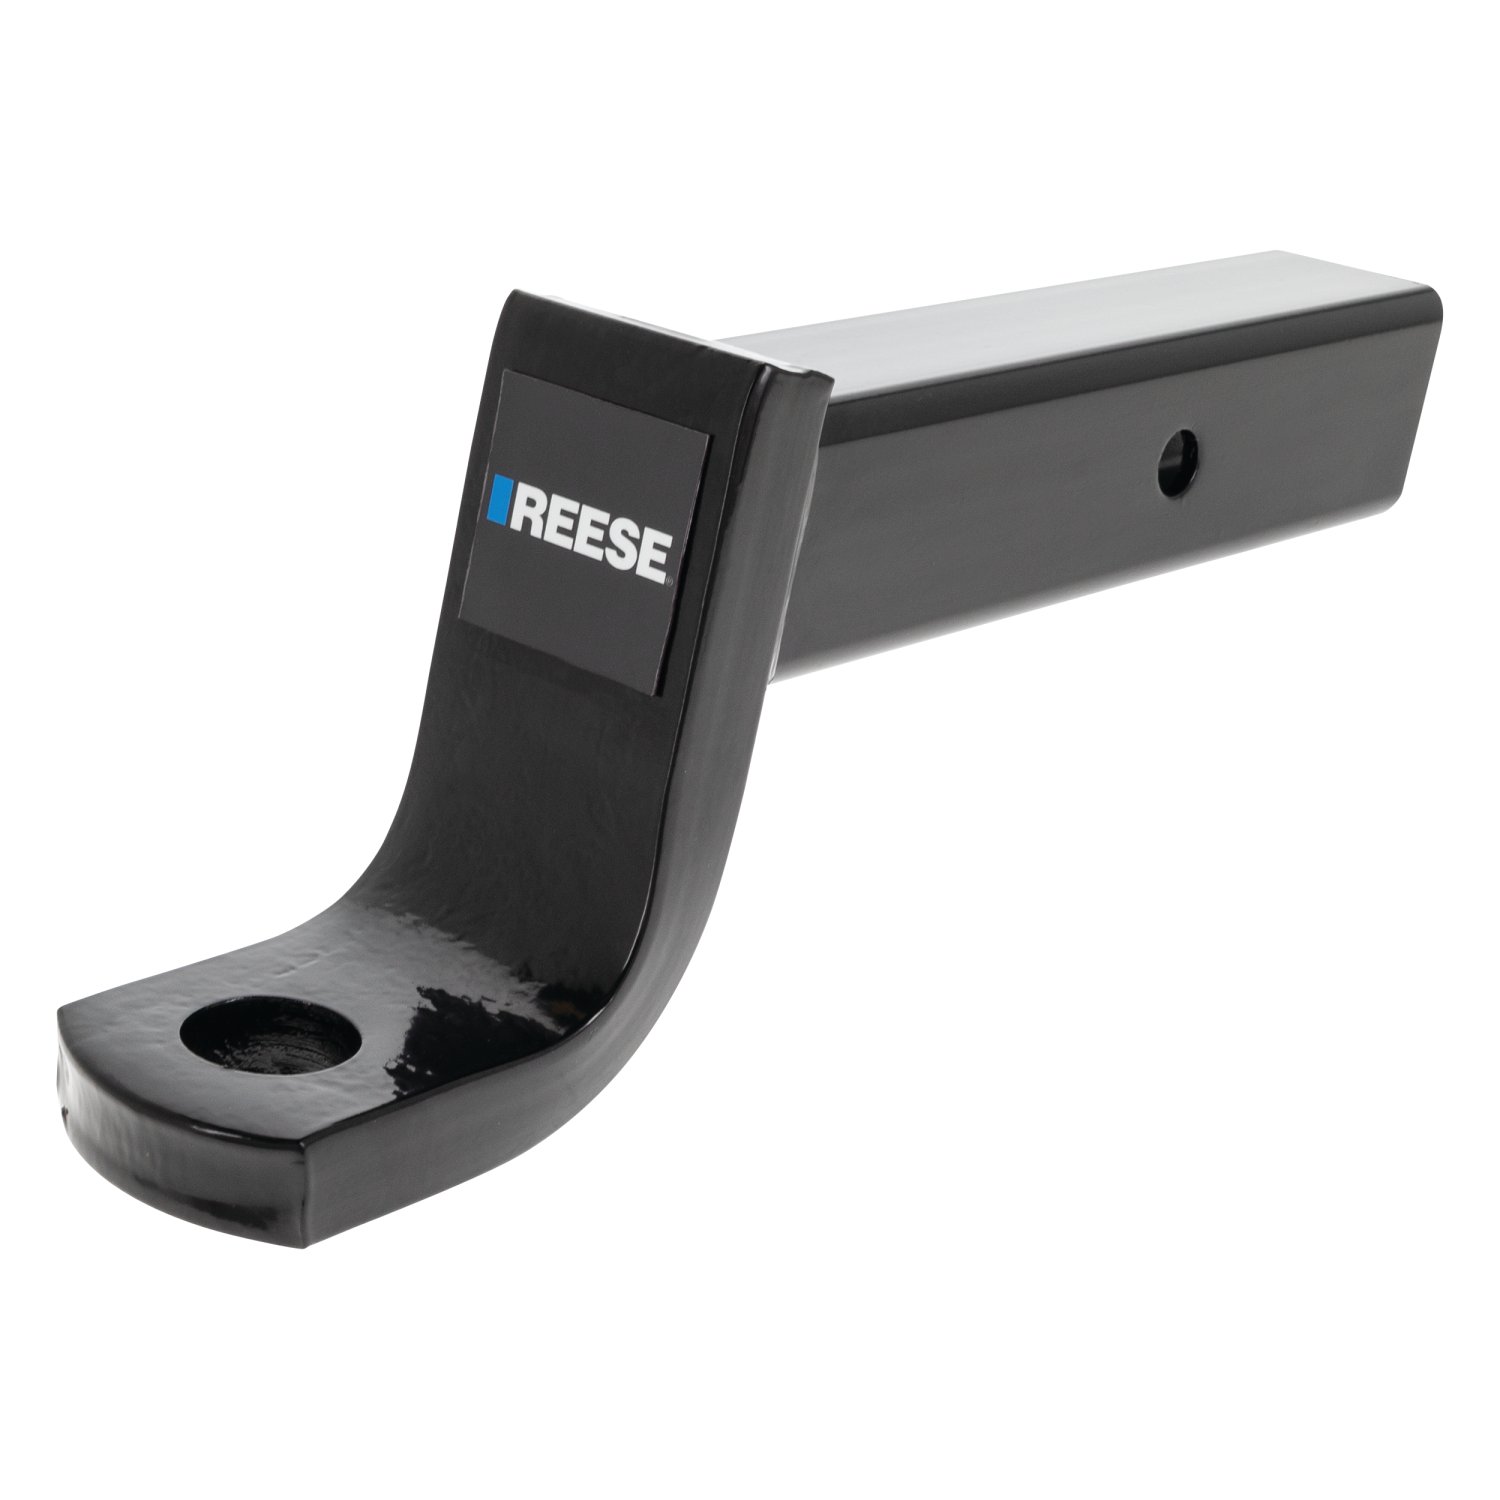 Reese Trailer Hitch Ball Mount, Fits 2-1/2 in. Receiver, 5 in. Drop, 3.5 in. Rise, 13,000 lbs. Capacity, Black